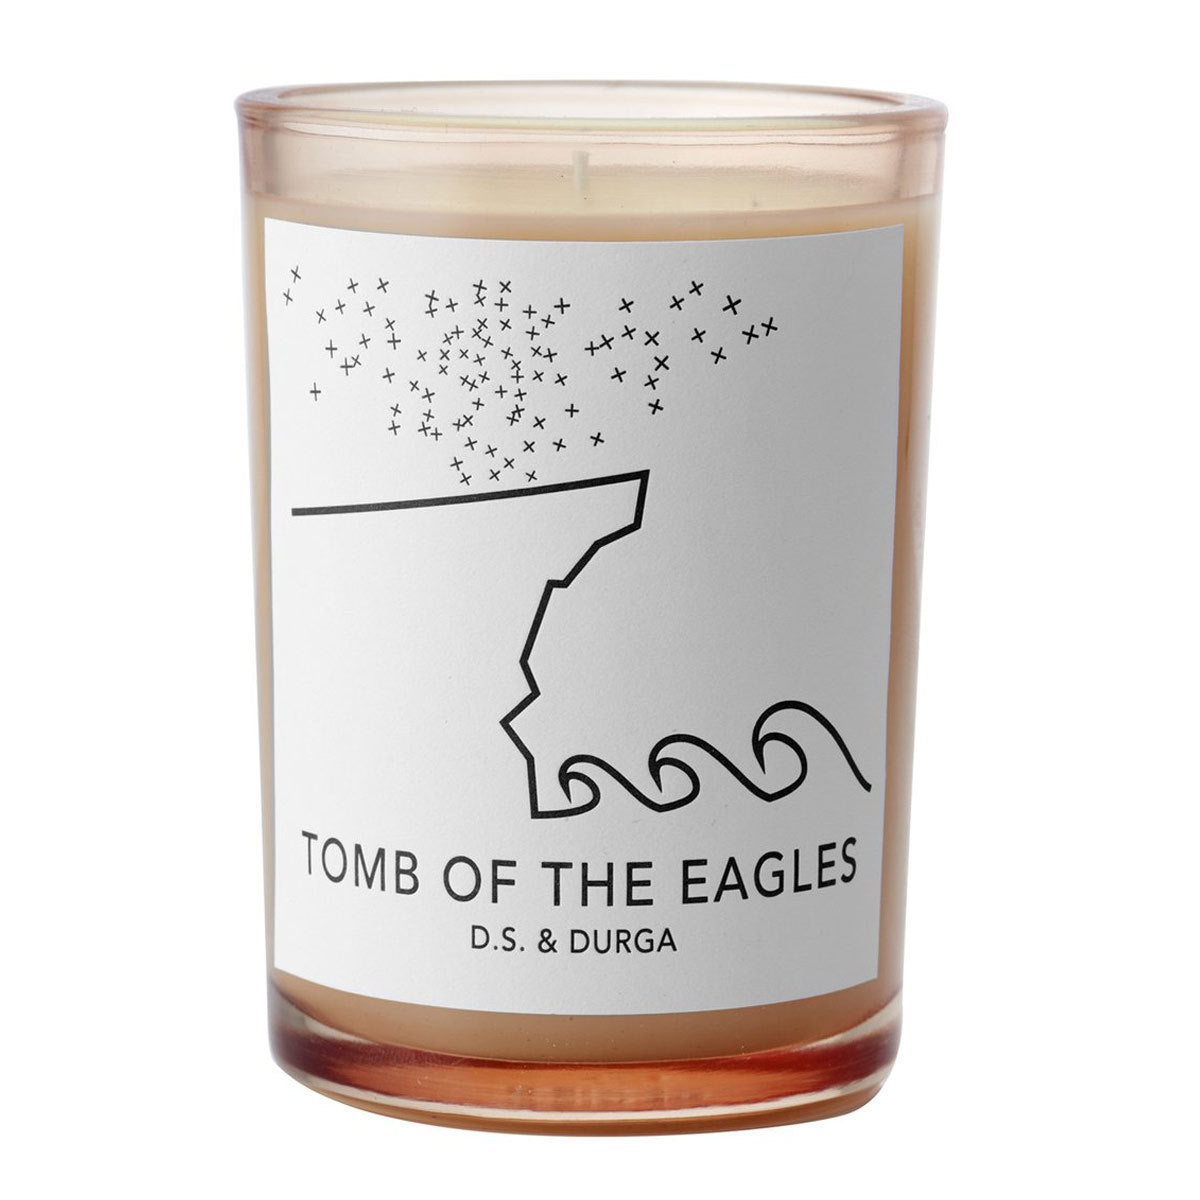 Primary image of Tomb of the Eagles Candle